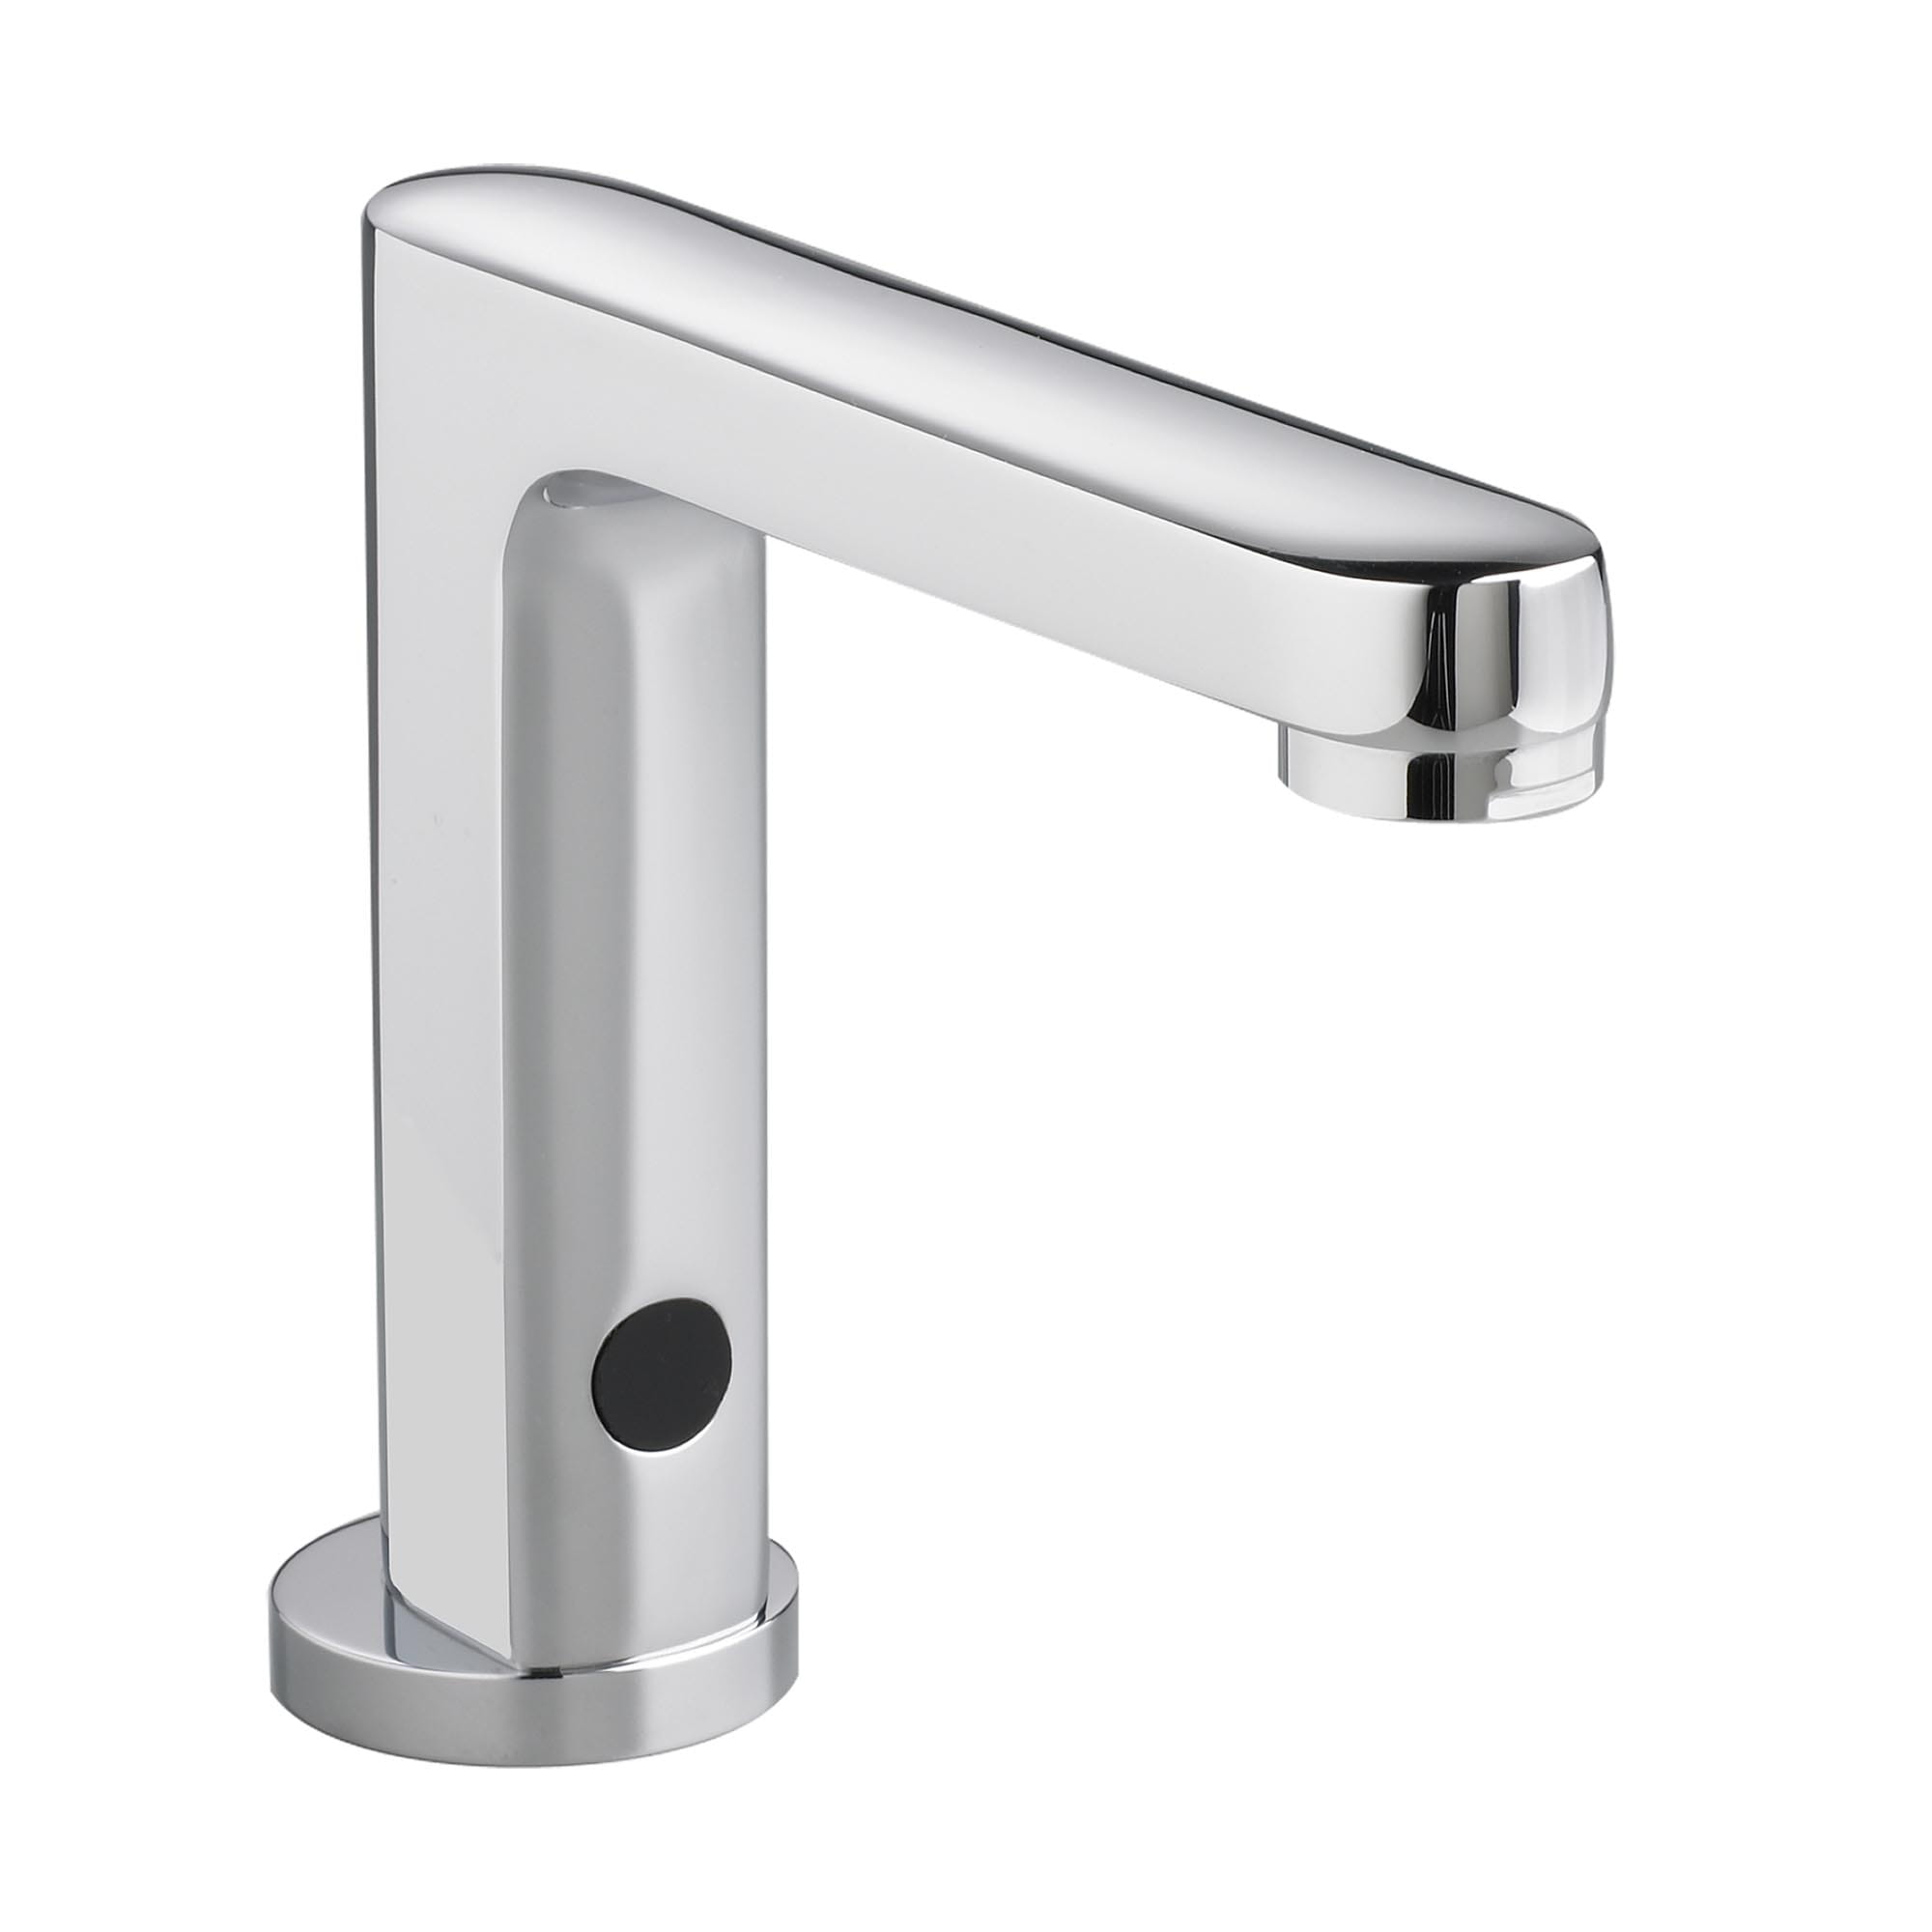 Selectronic Multi-AC Powered Single Hole Touchless Bathroom Faucet 0.5 GPM Cast Brass Spout with Vandal Resistant Multi-Laminar Spray